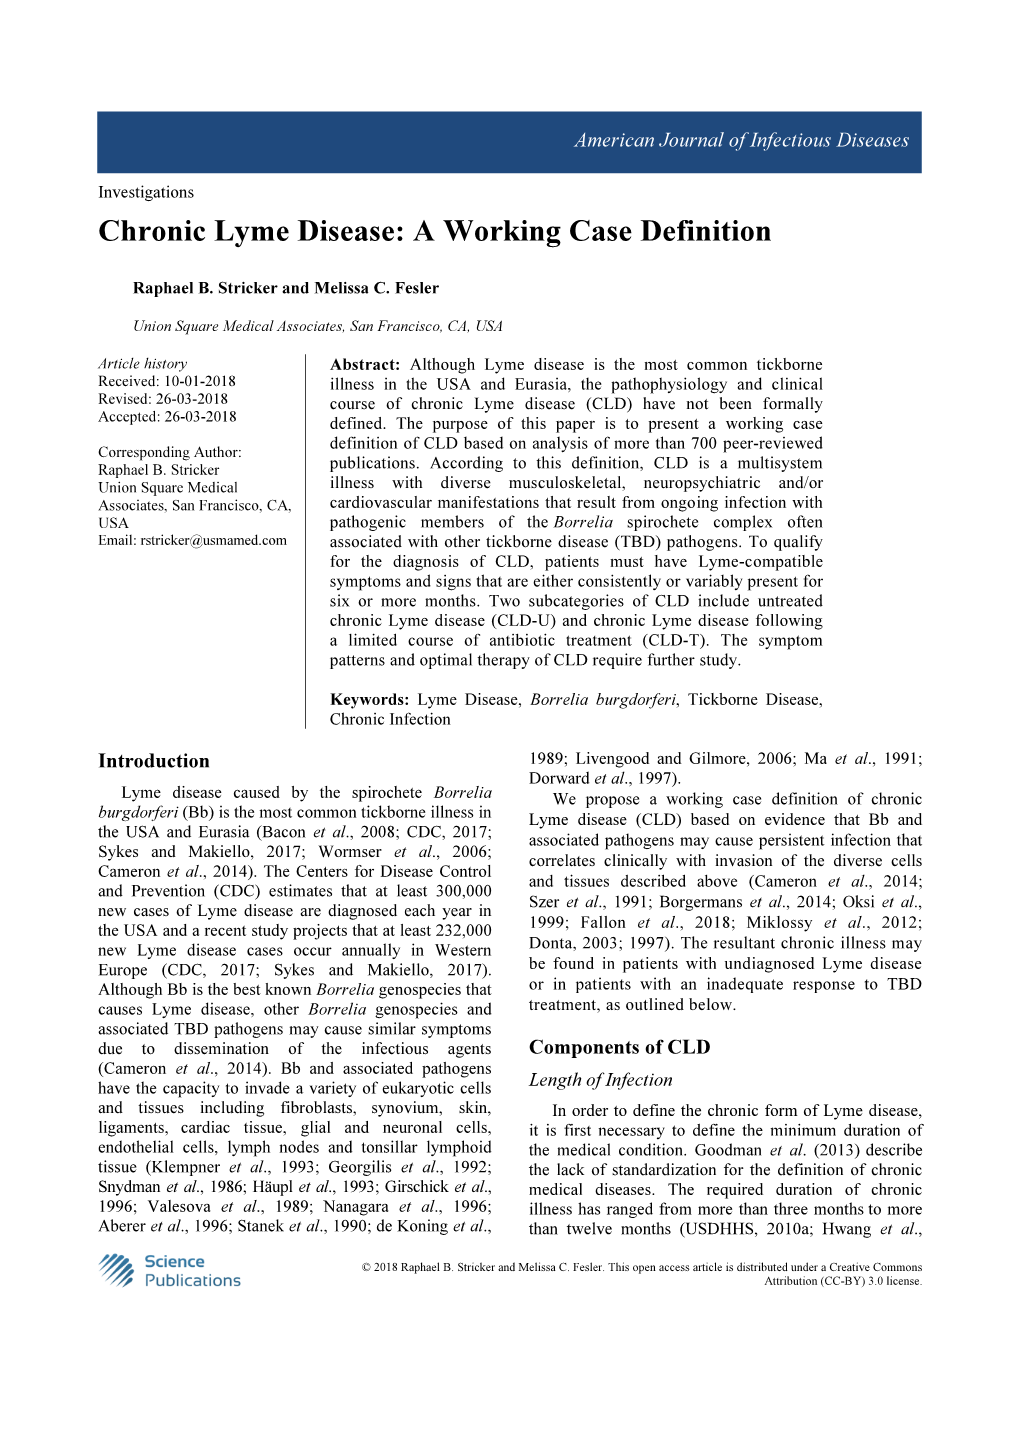 Chronic Lyme Disease: a Working Case Definition